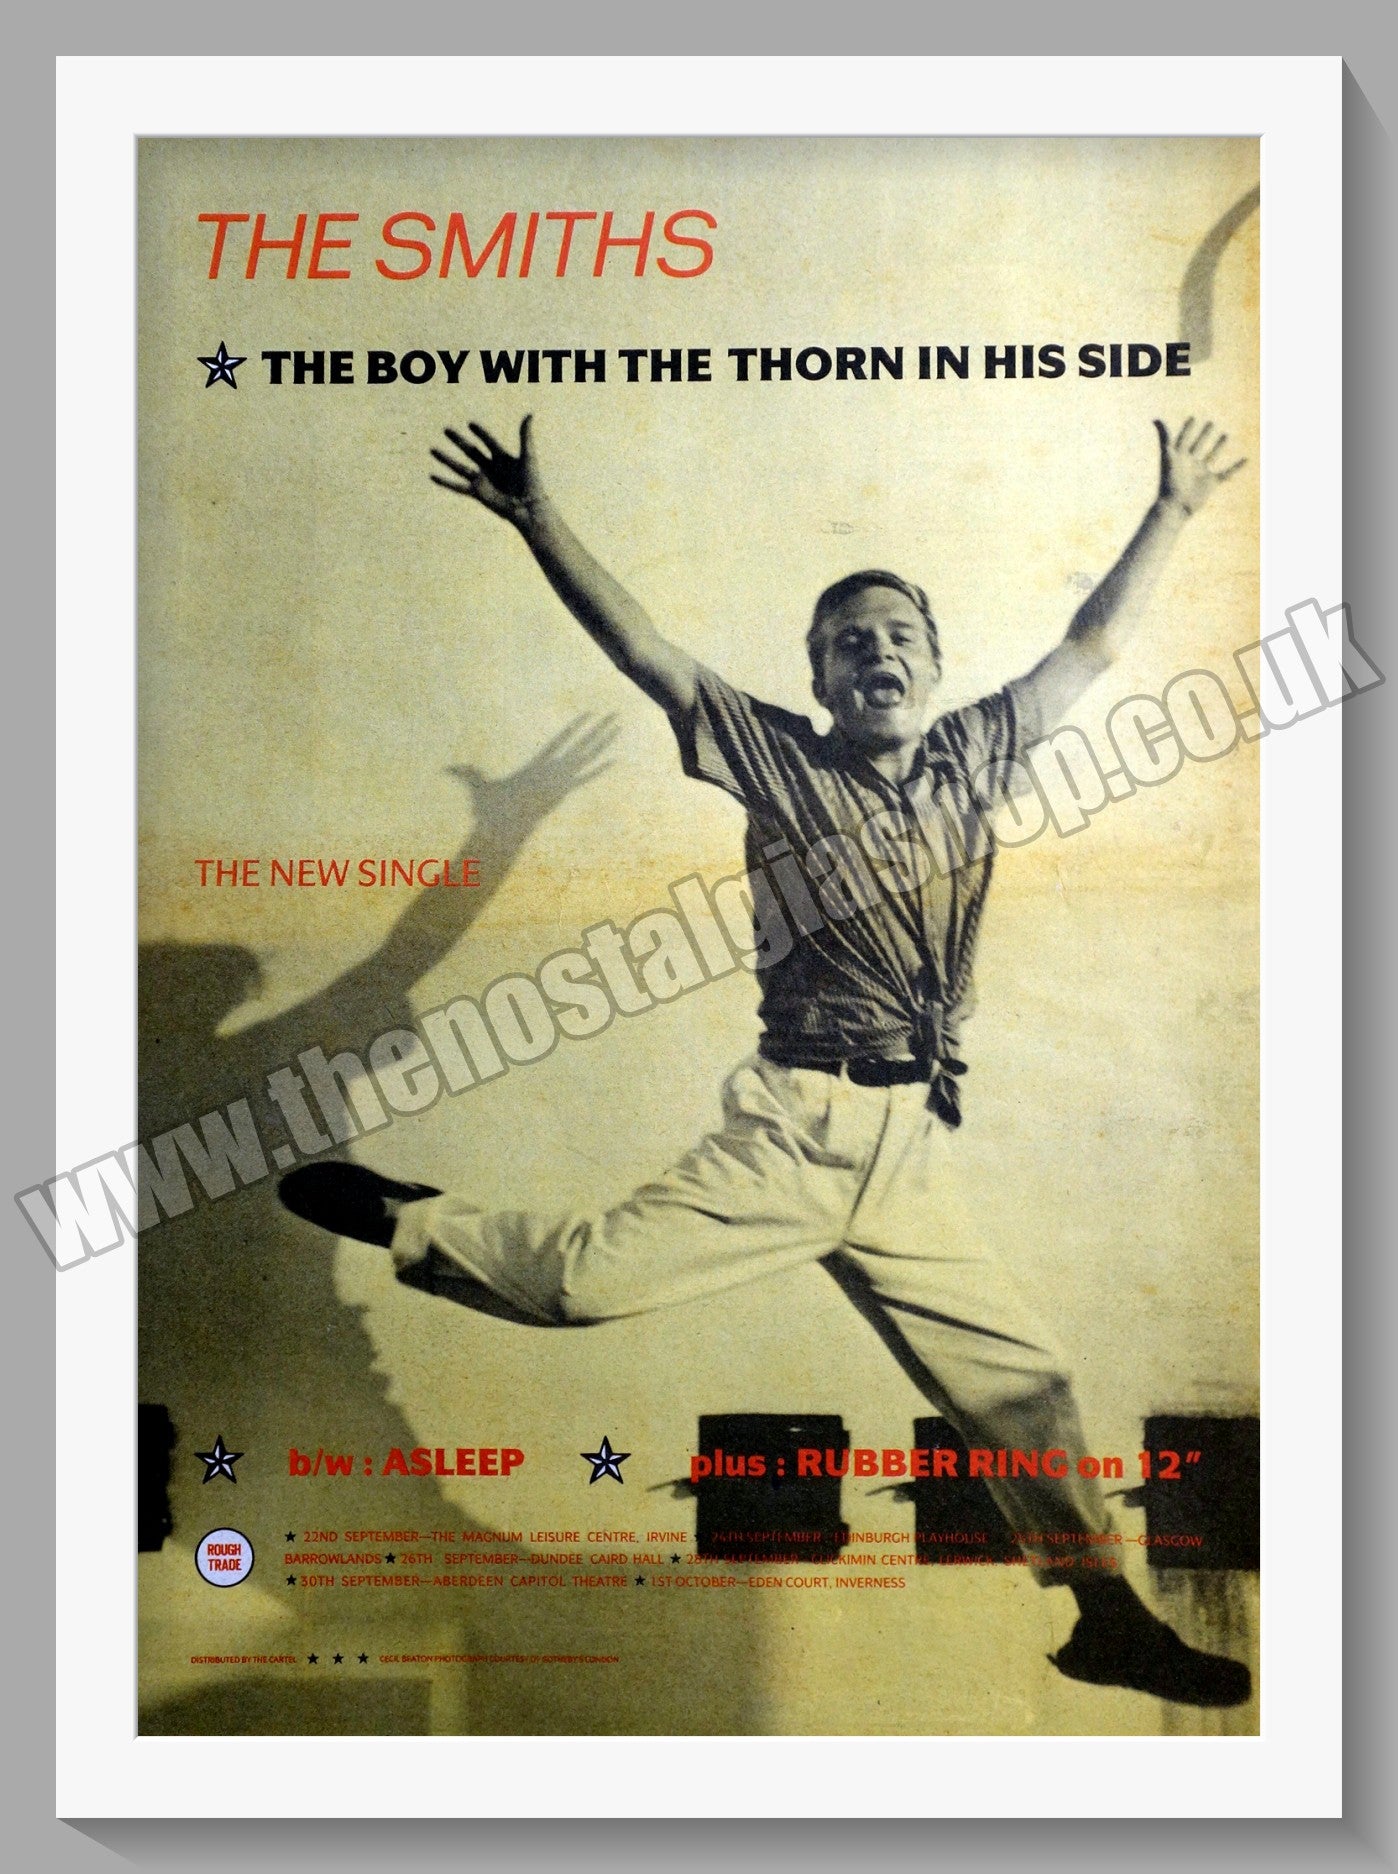 Smiths (The) The Boy With The Thorn In His Side. Original Vintage Advert 1985 (ref AD14740)